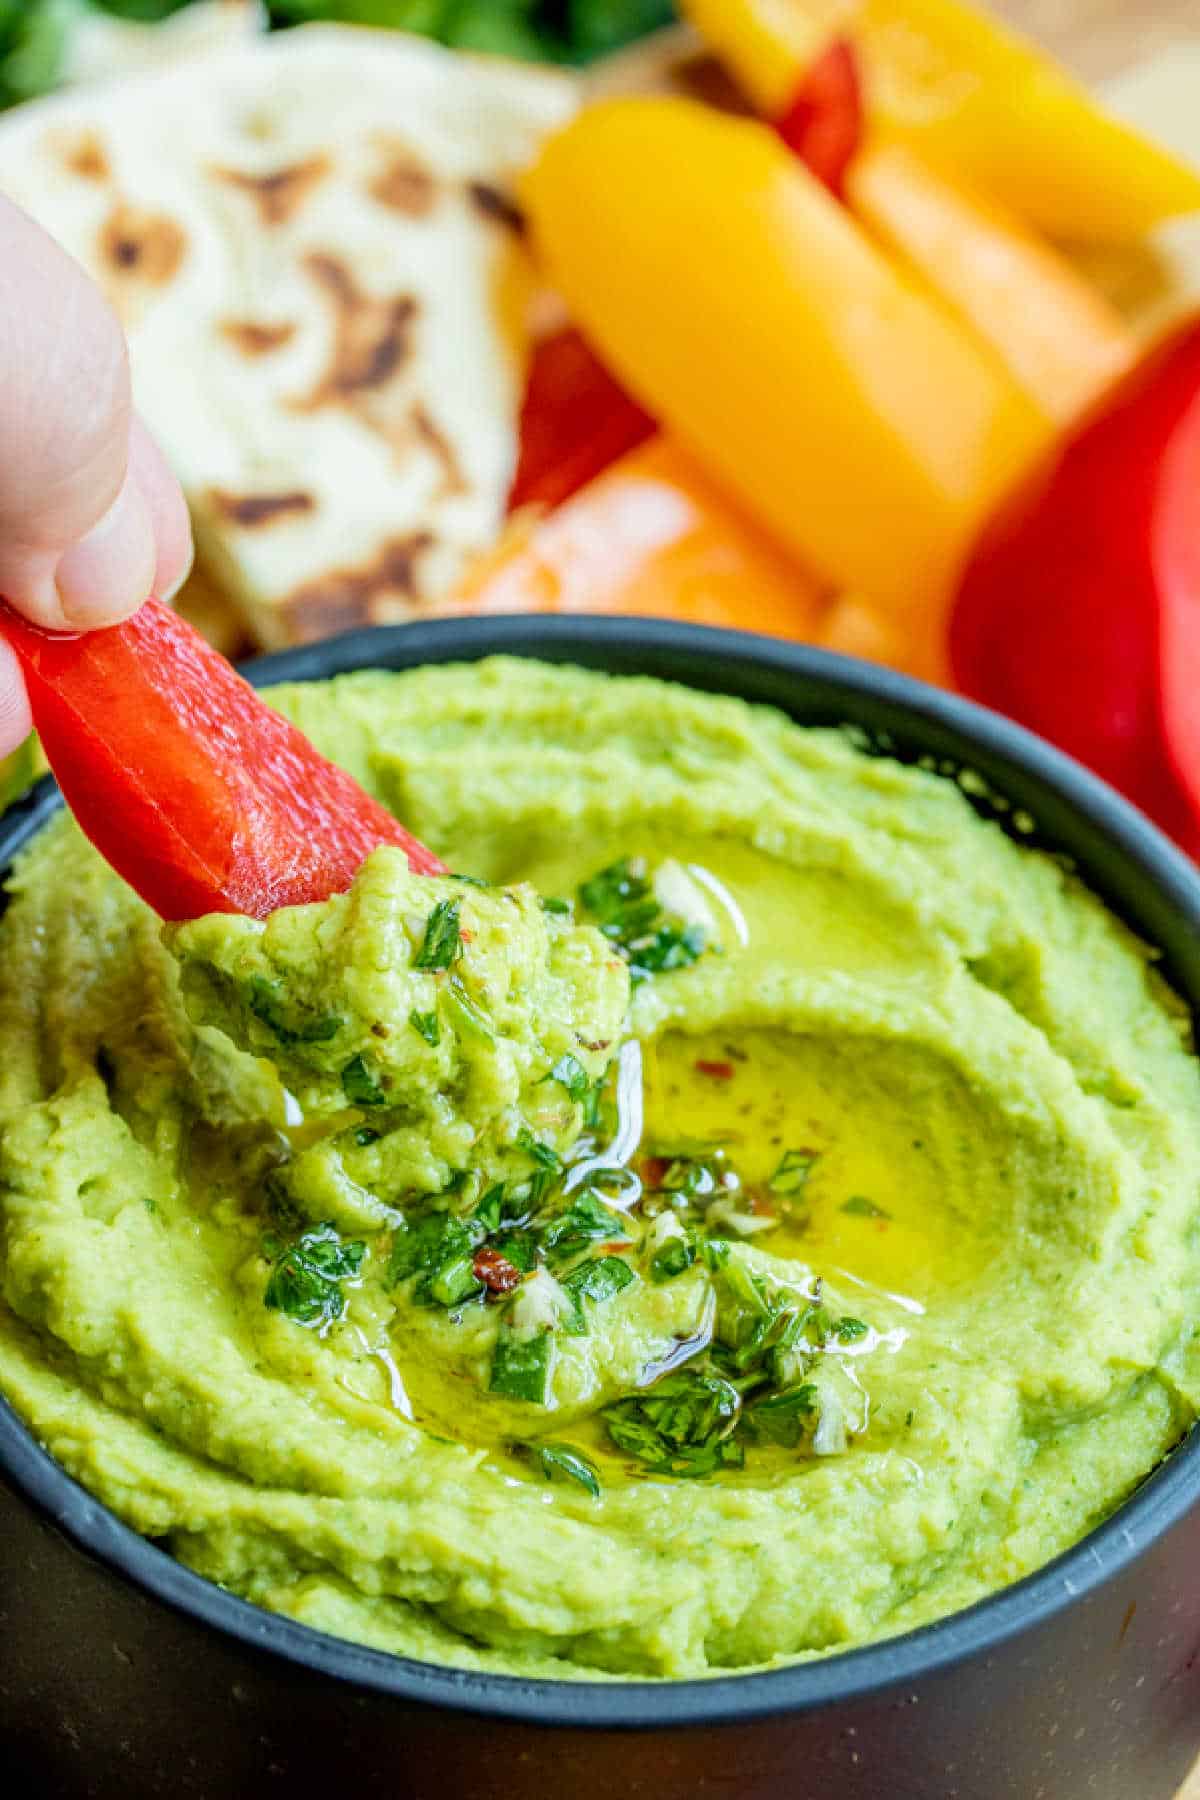 red bell pepper dipped in Avocado Hummus